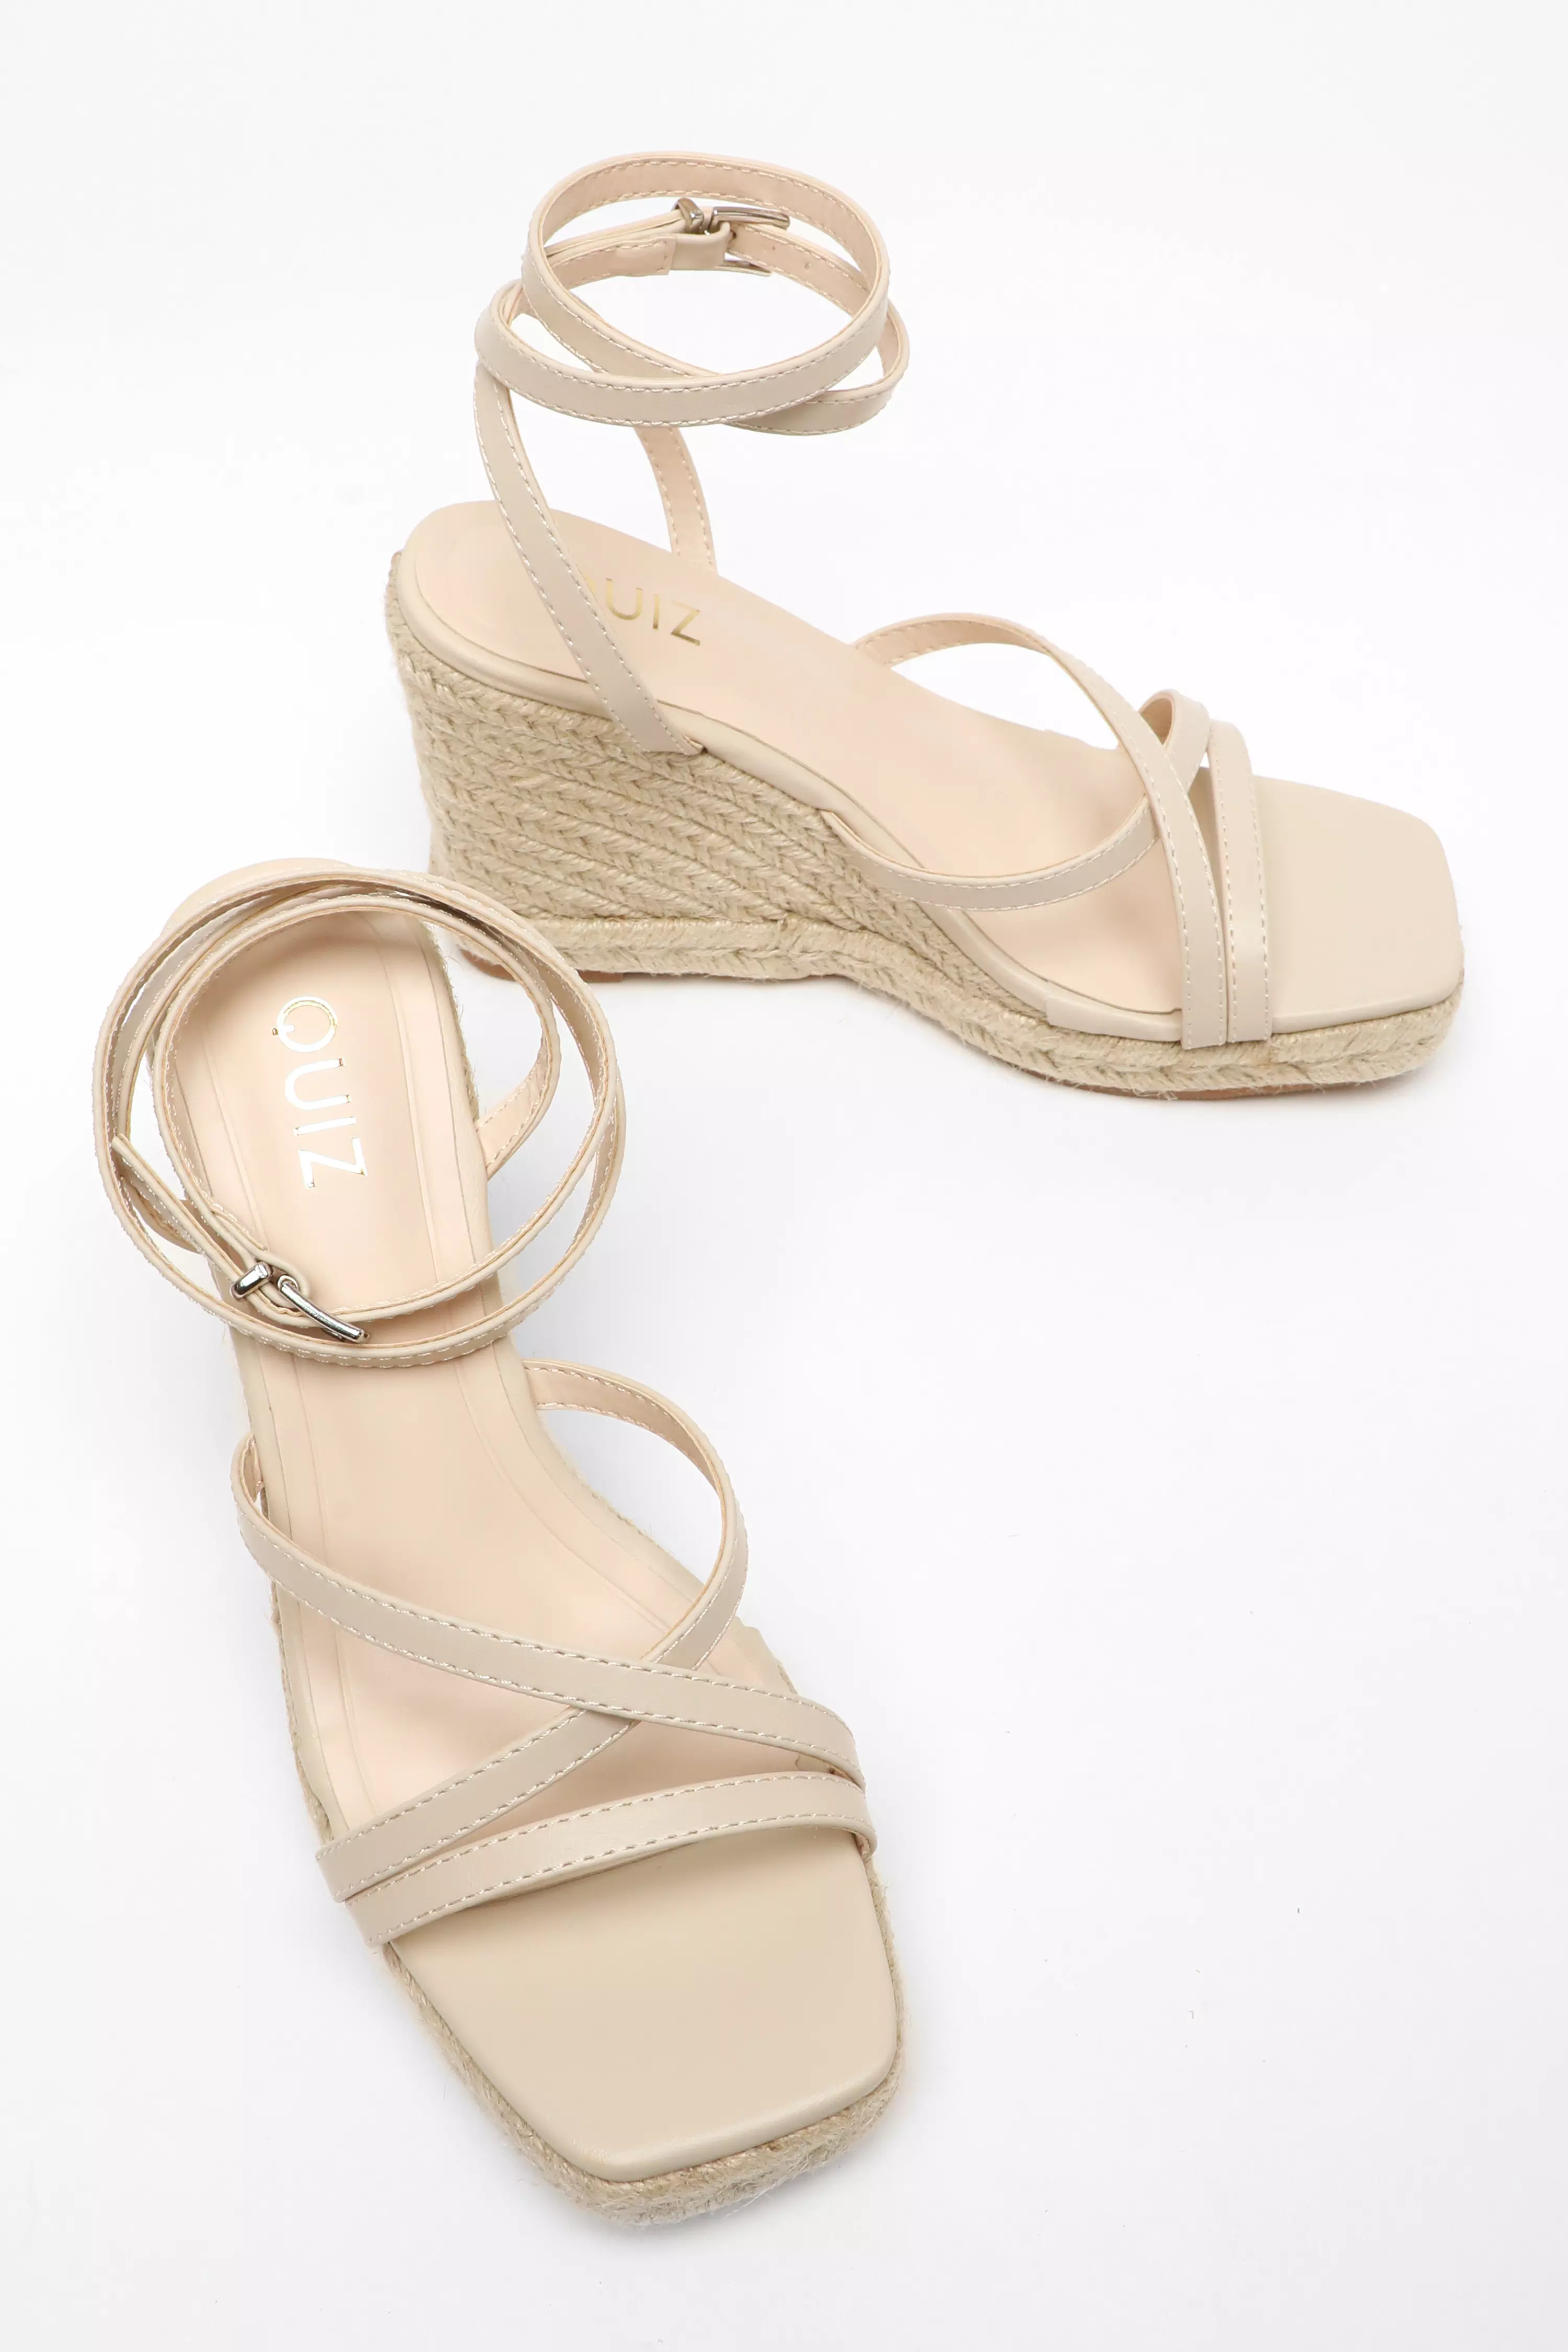 Nude Faux Leather Strappy Woven Wedges